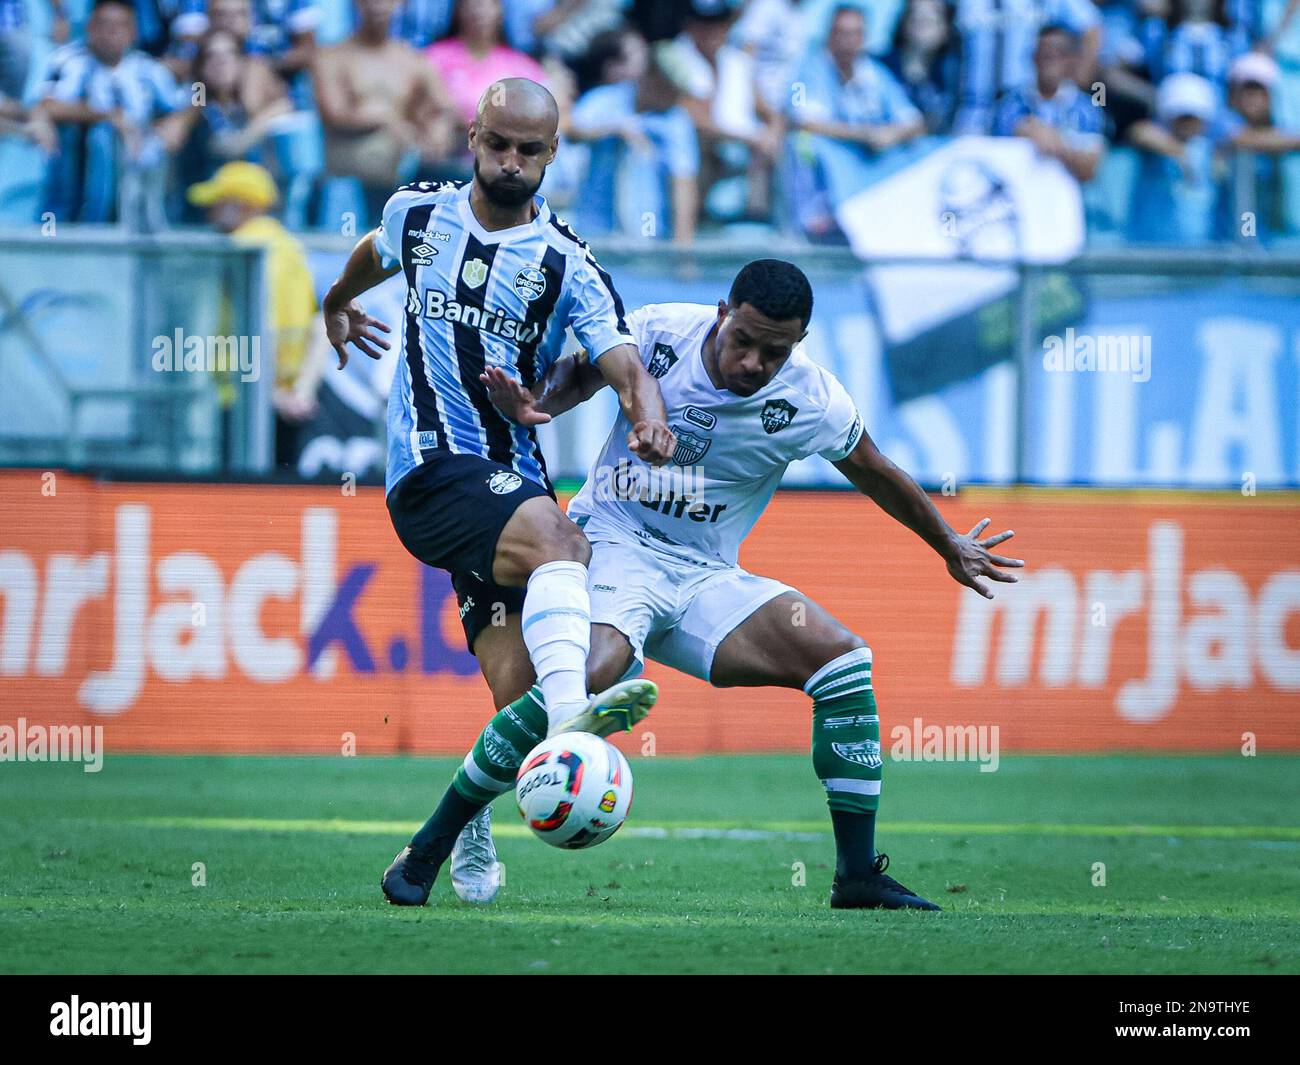 Gremio vs CRB: Exciting Clash Between Two Brazilian Football Giants